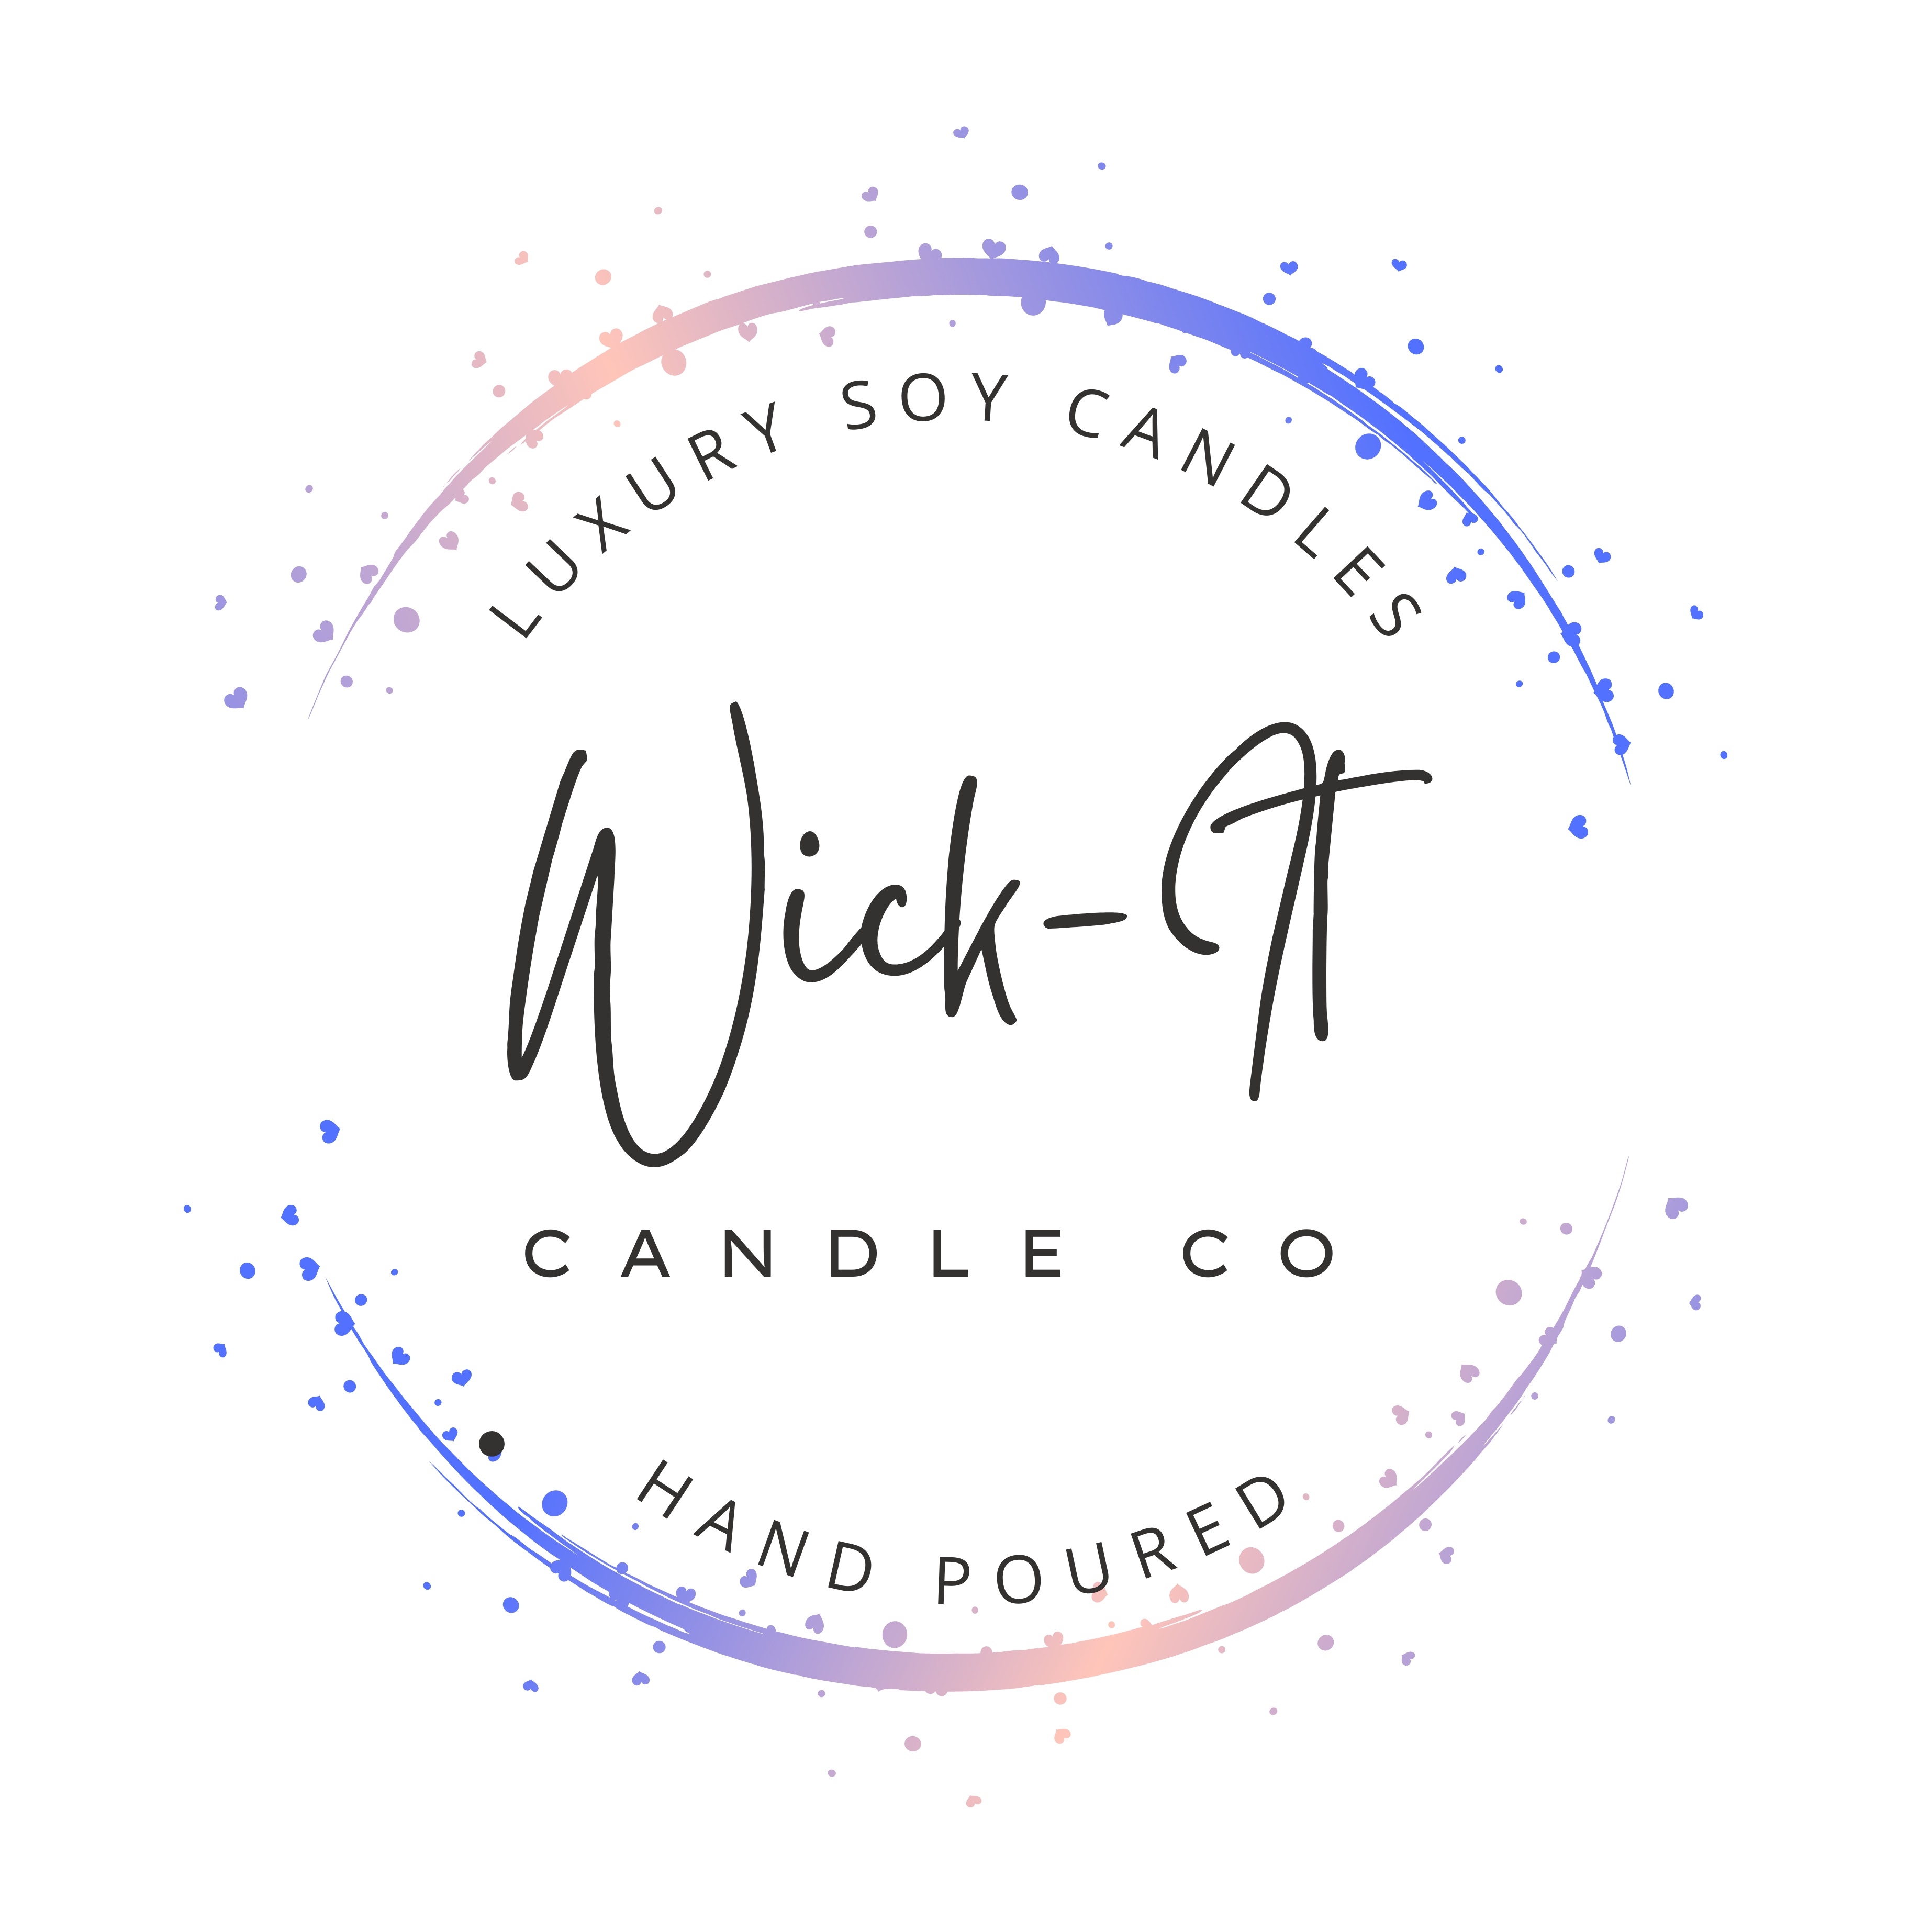 WICK-IT CANDLE CO